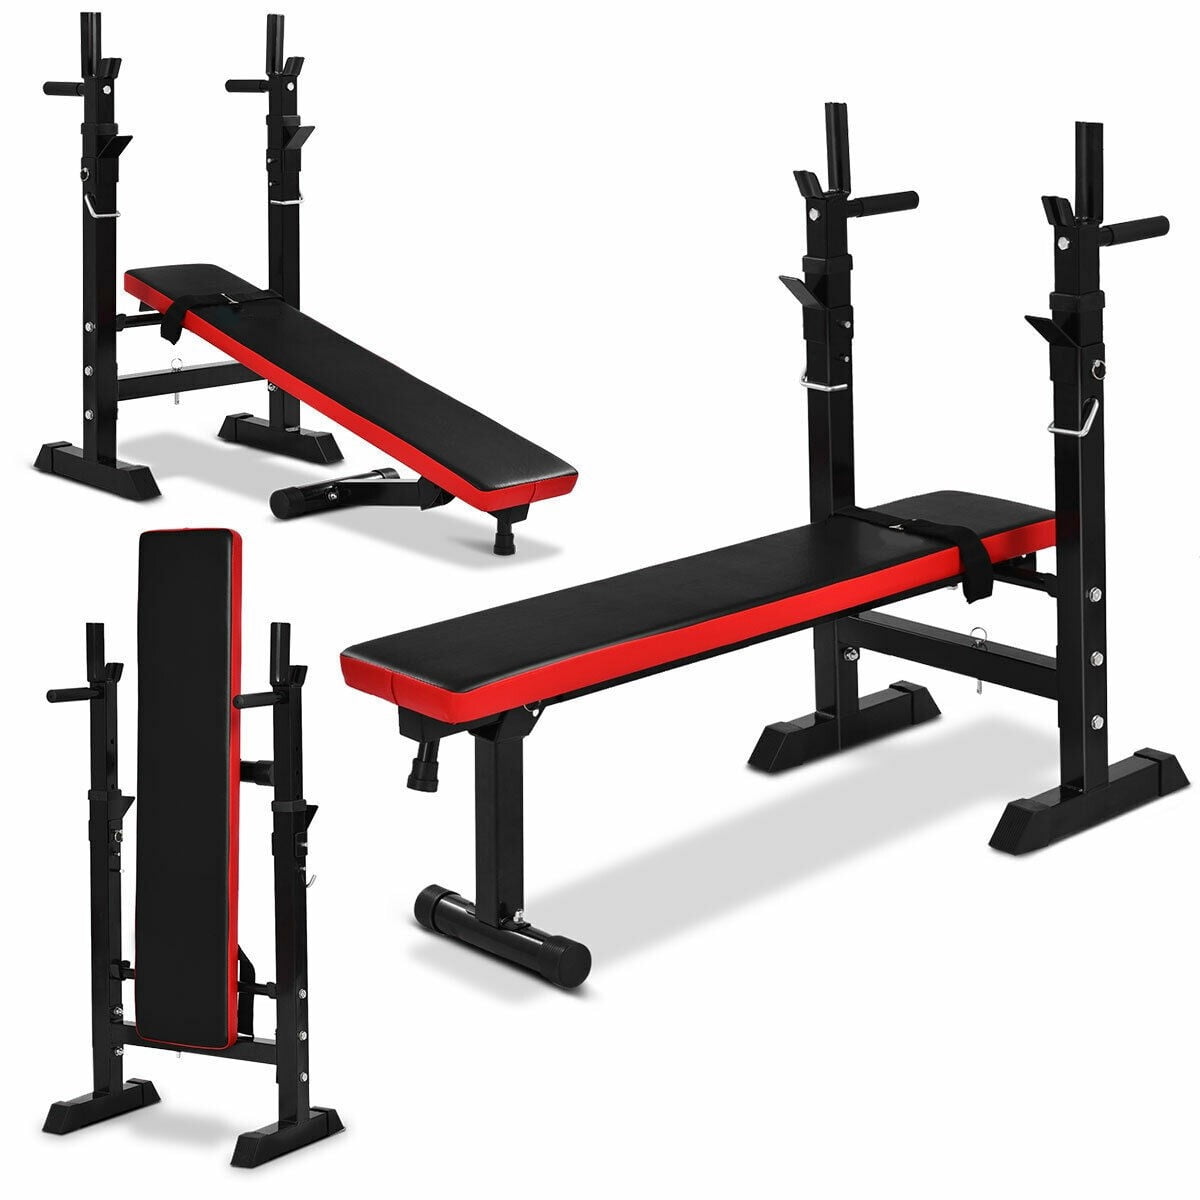 Compact Design for Home Adjustable Folding Fitness Barbell Rack Weight Bench Sports Compact Design for Home Gym Strength Training Indoor 